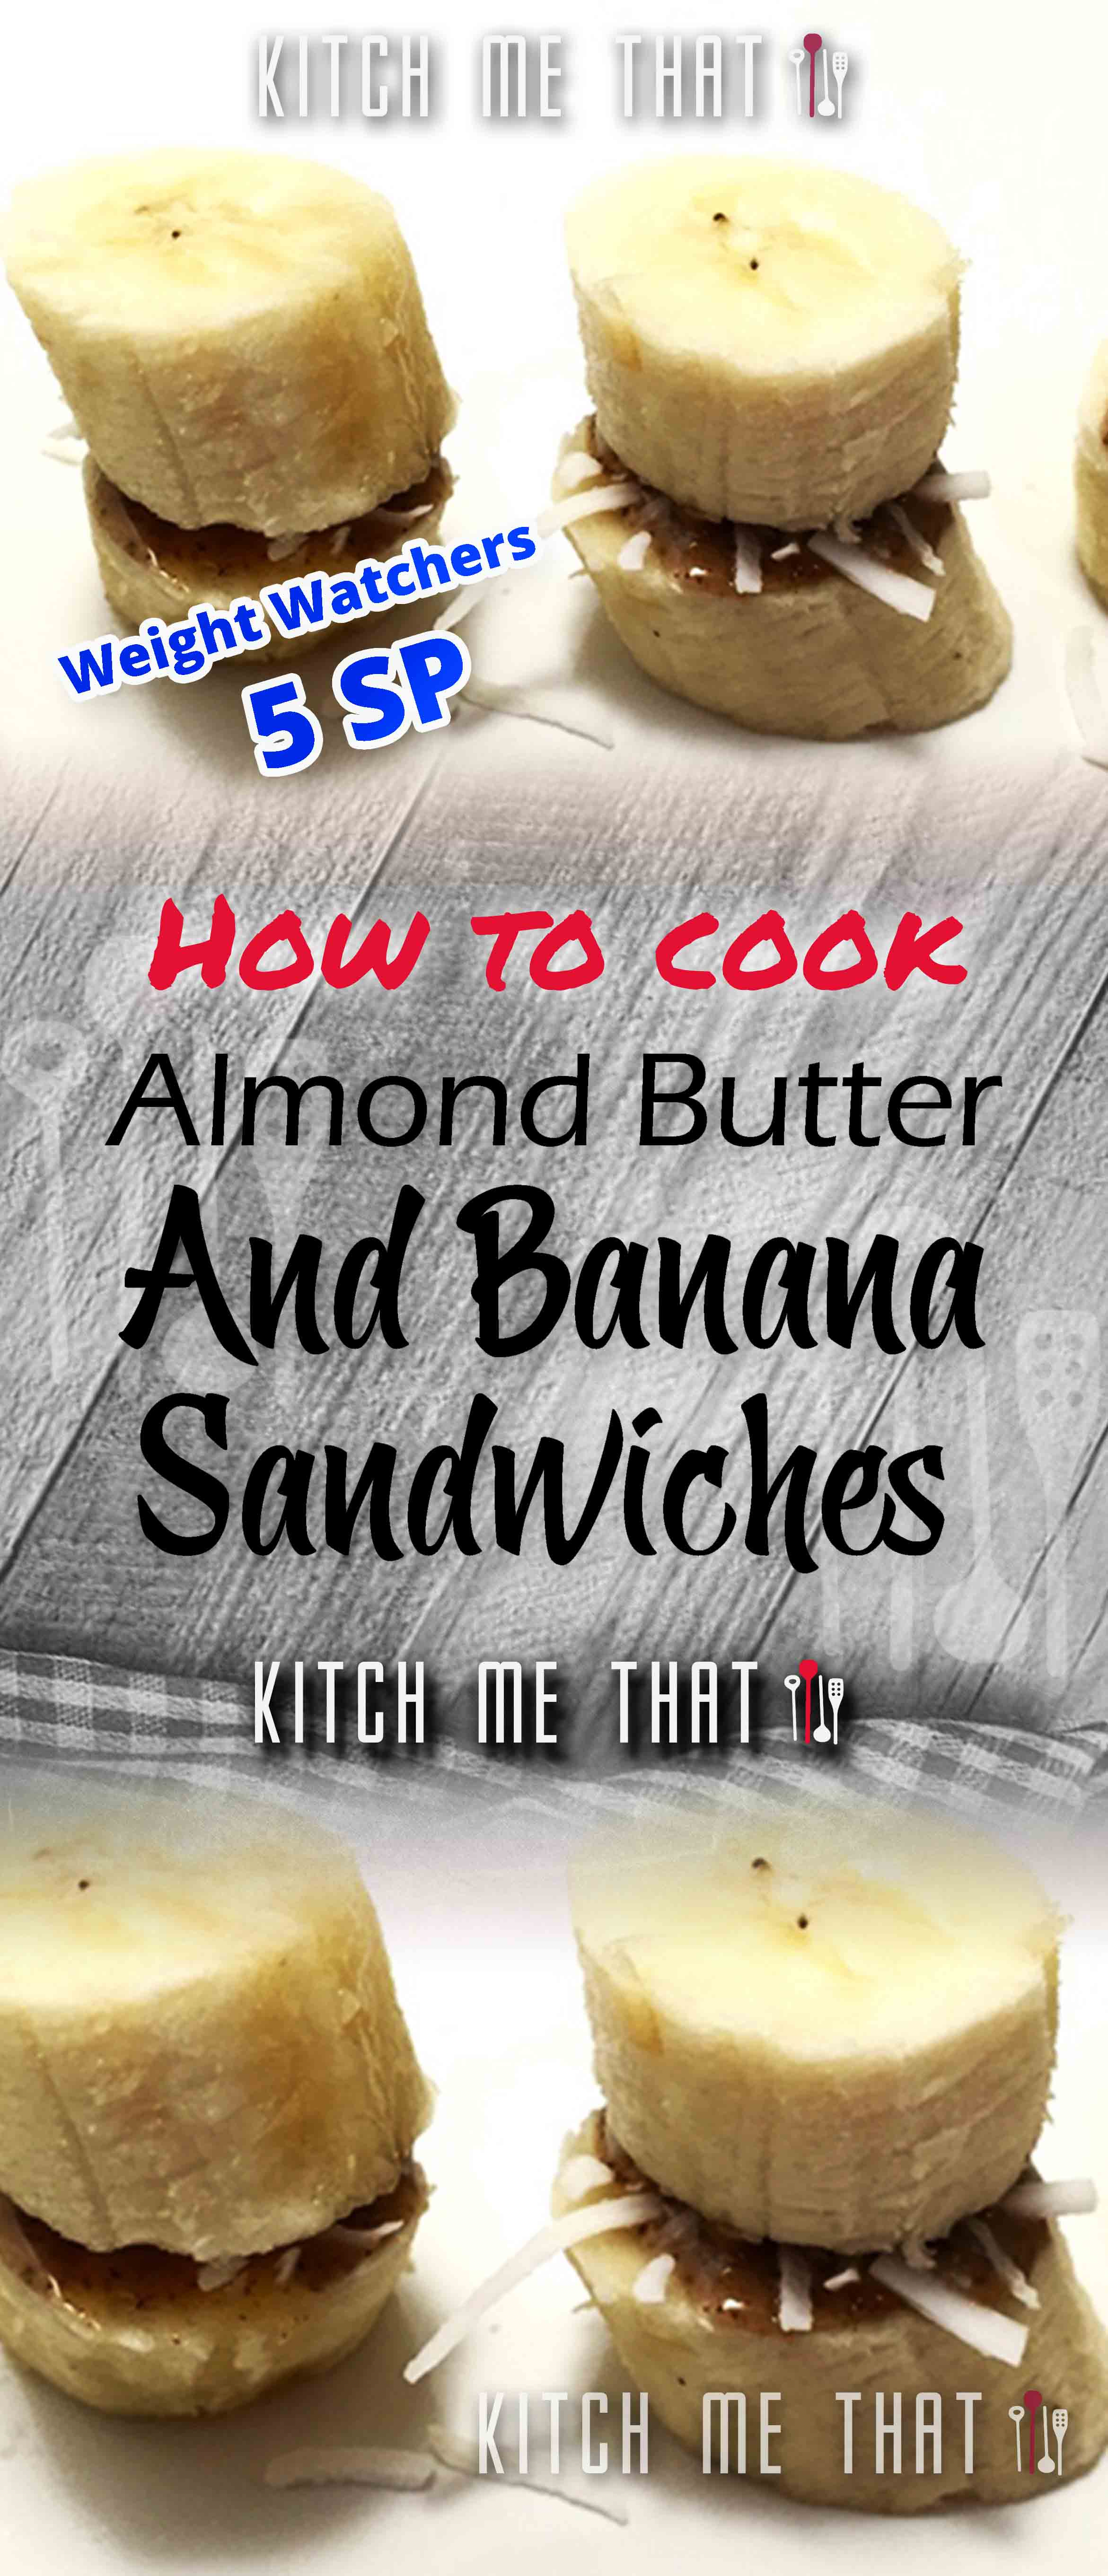 Exclusive Almond Butter And Banana Sandwiches NEW 2021